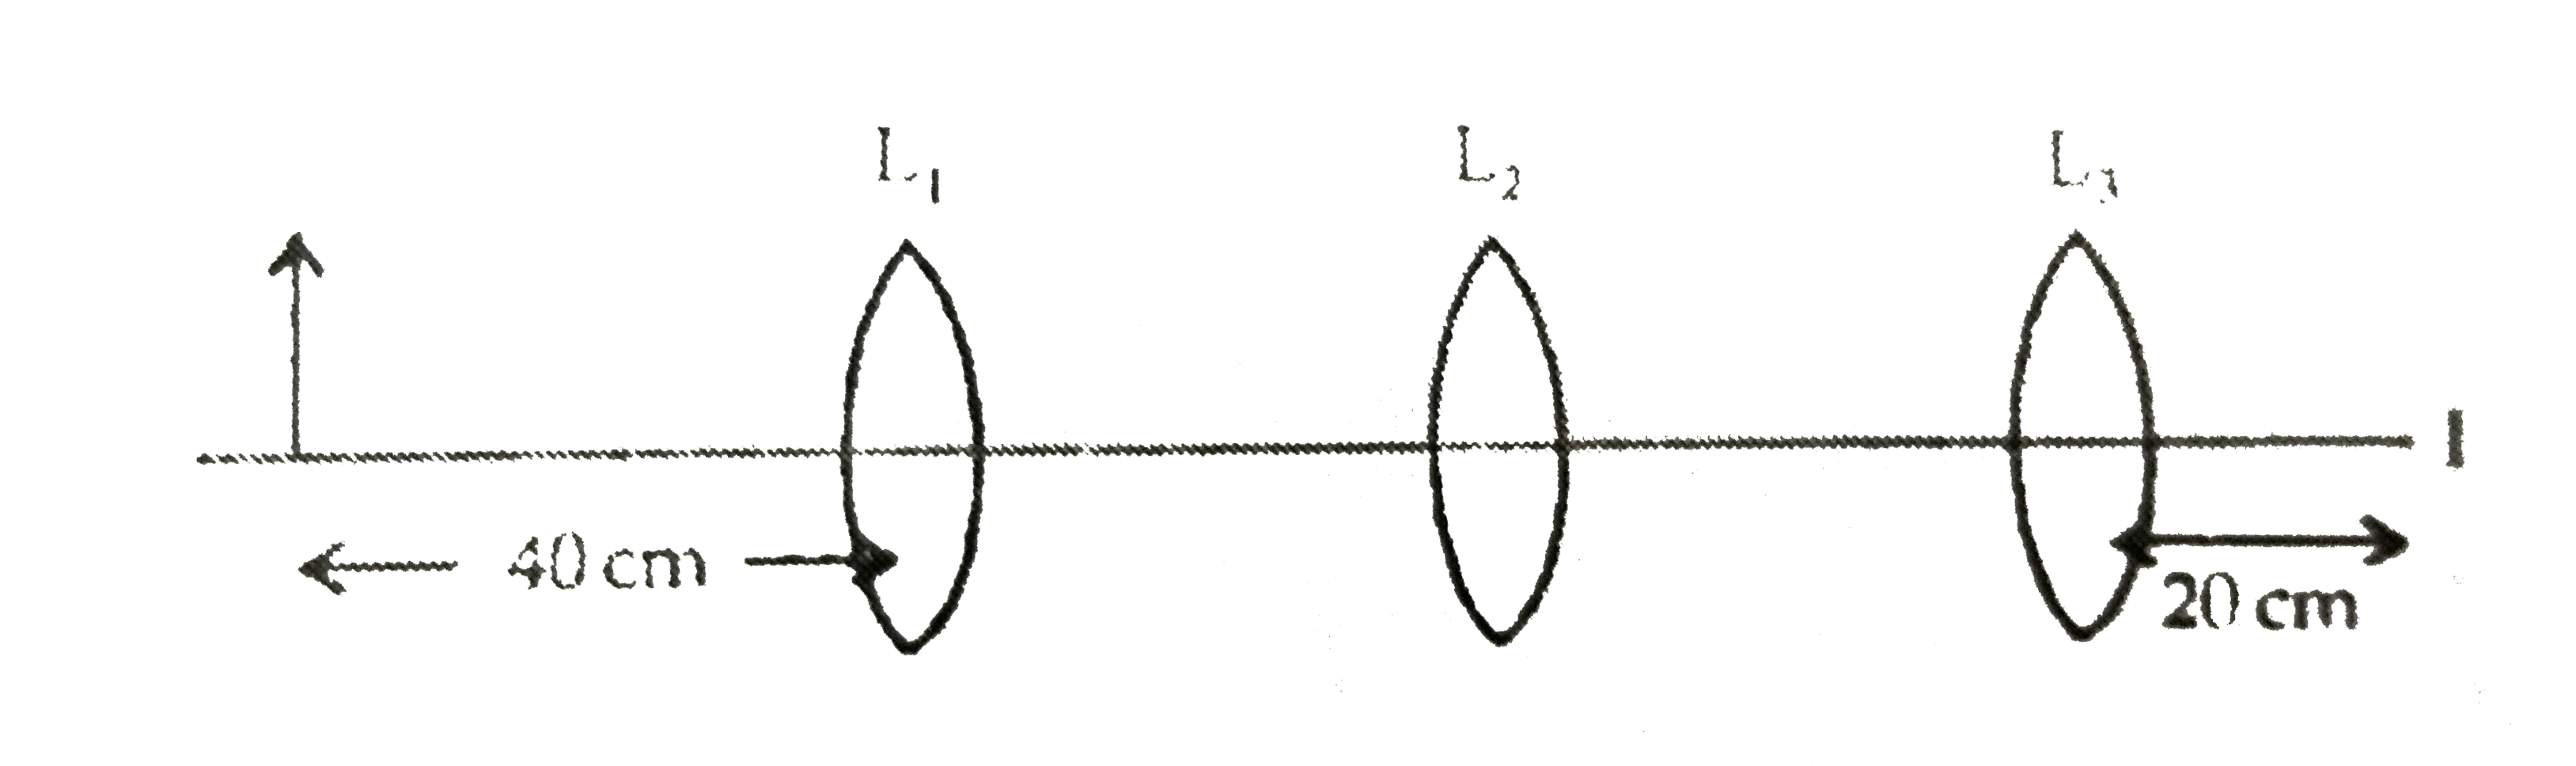 You are given three lenses L(1),L(2) and L(3) each of focal length 20 cm. An object is kept at 40 cm in front of L(1), as shown. The final real image is formed at the focus 'I' of L(3). Find the separations between L(1),L(2) and L(3).